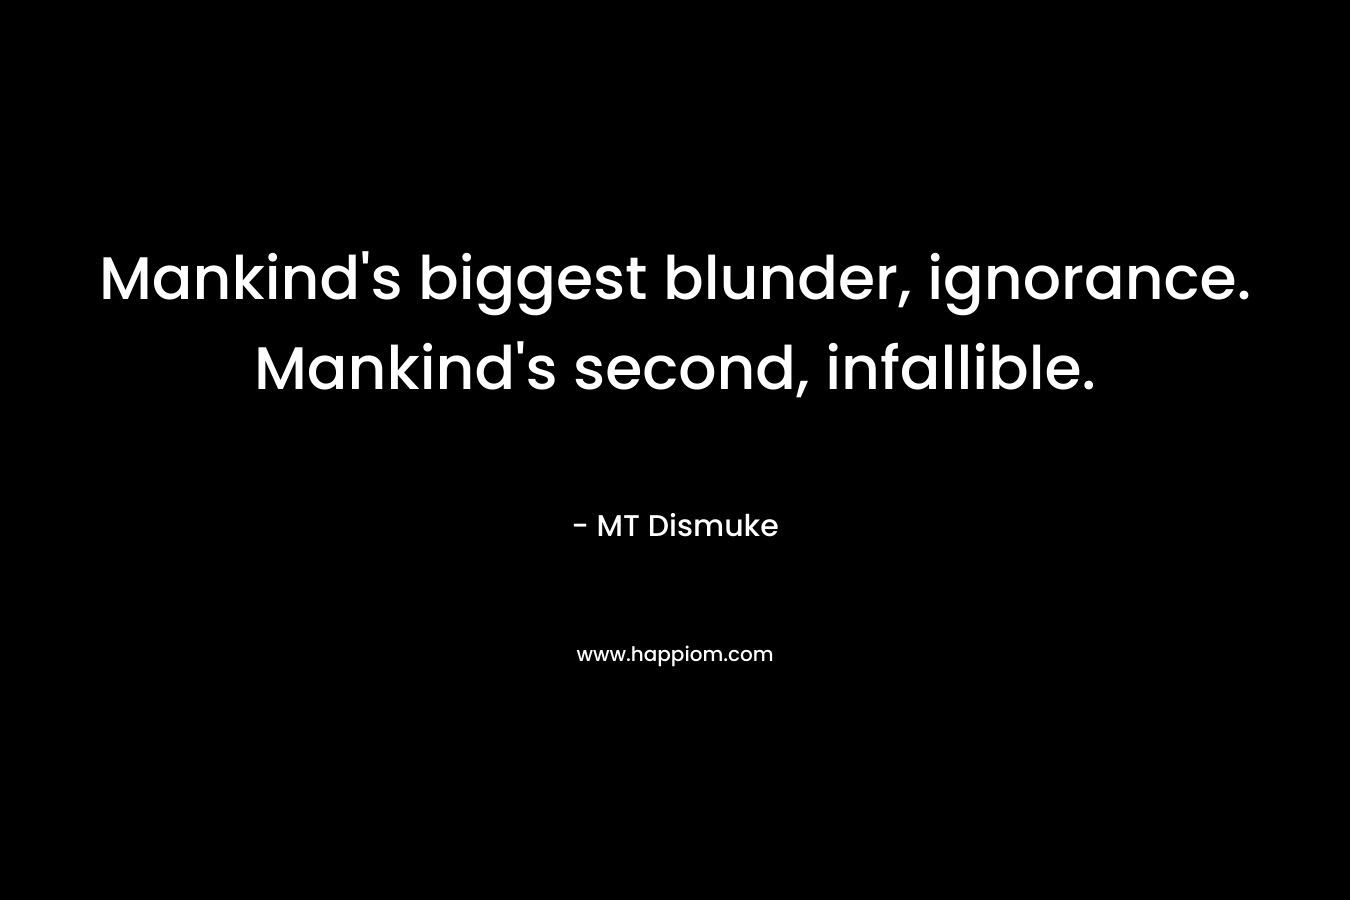 Mankind's biggest blunder, ignorance. Mankind's second, infallible.